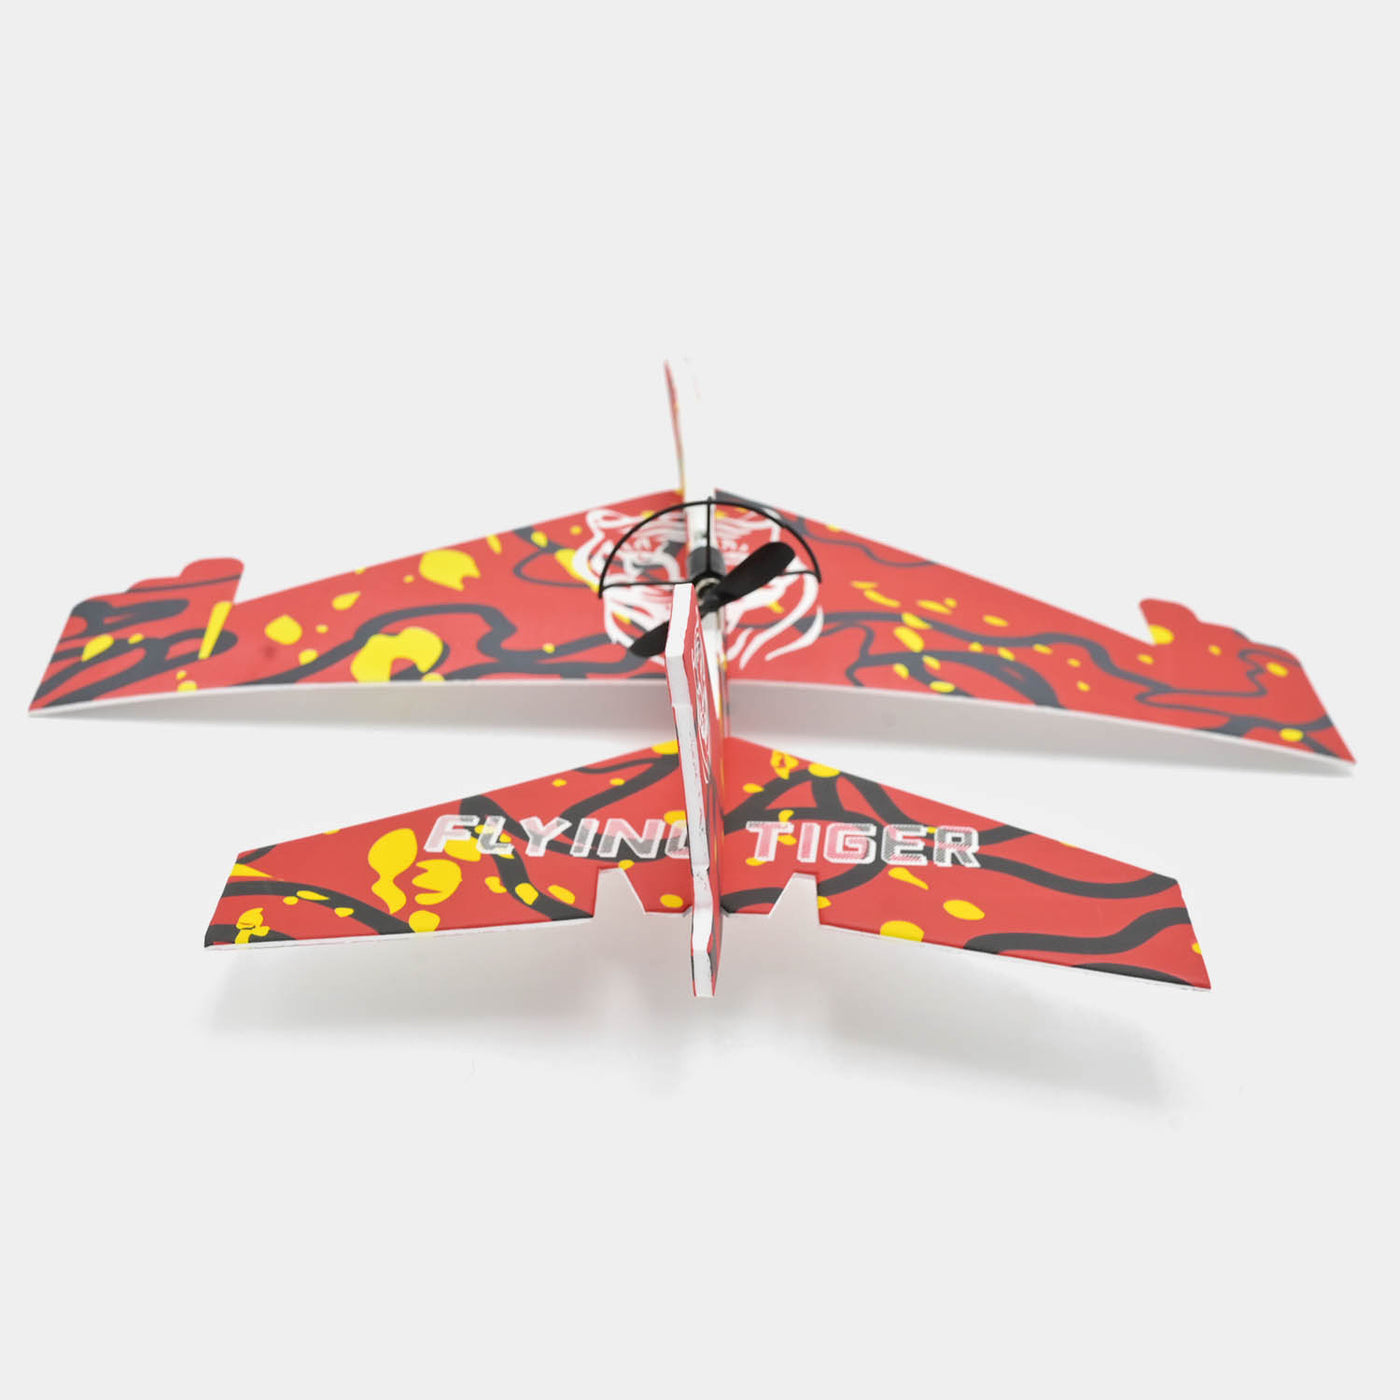 Rechargeable Foamy Glider Aircraft With Lights - Red